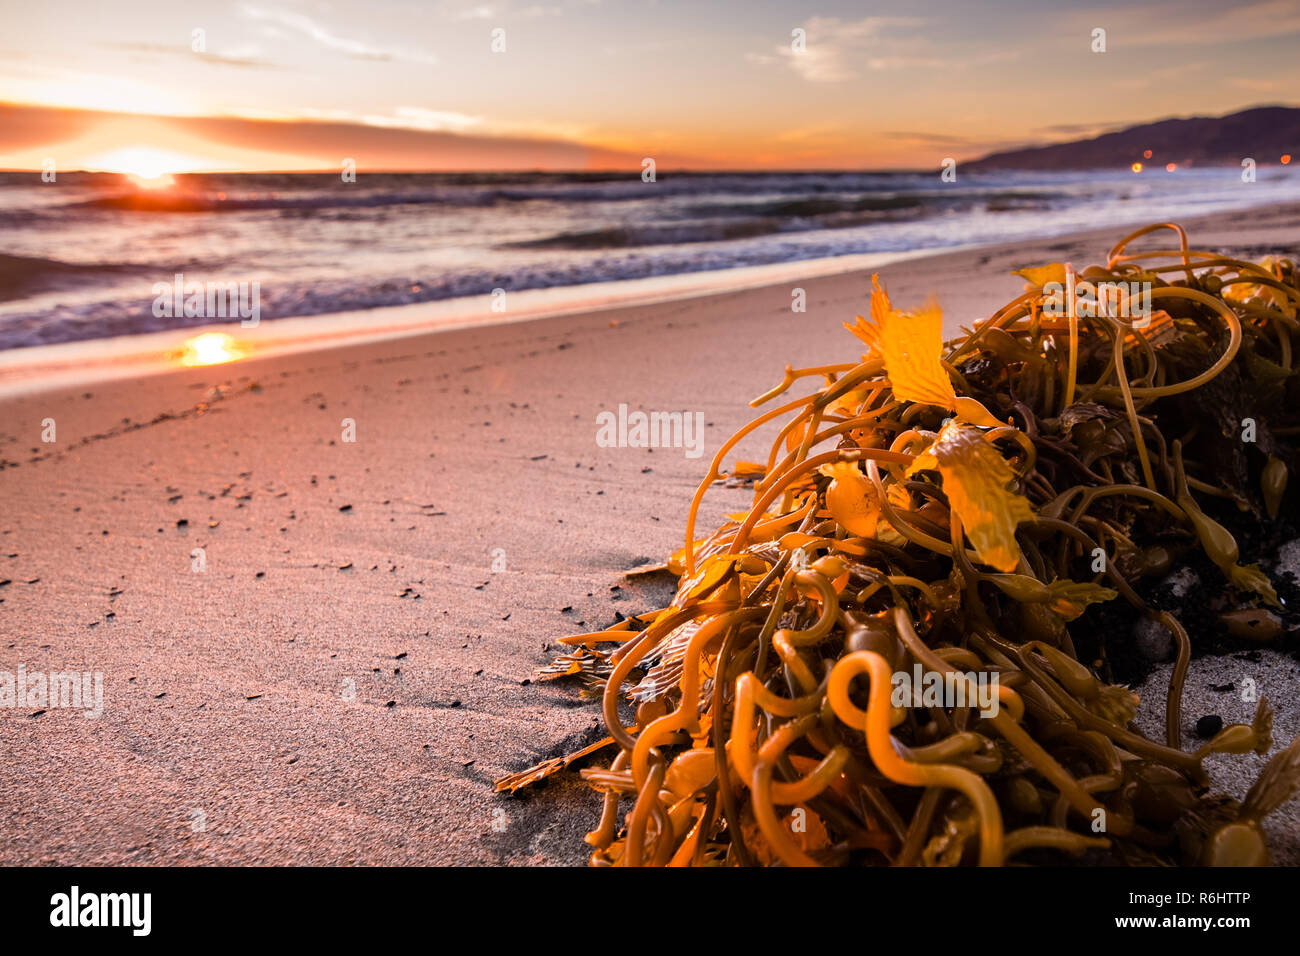 Seaweed washed out on a sandy beach, bathed in the sunset light; Malibu beach, the Pacific Ocean coastline, Los Angeles county, California Stock Photo